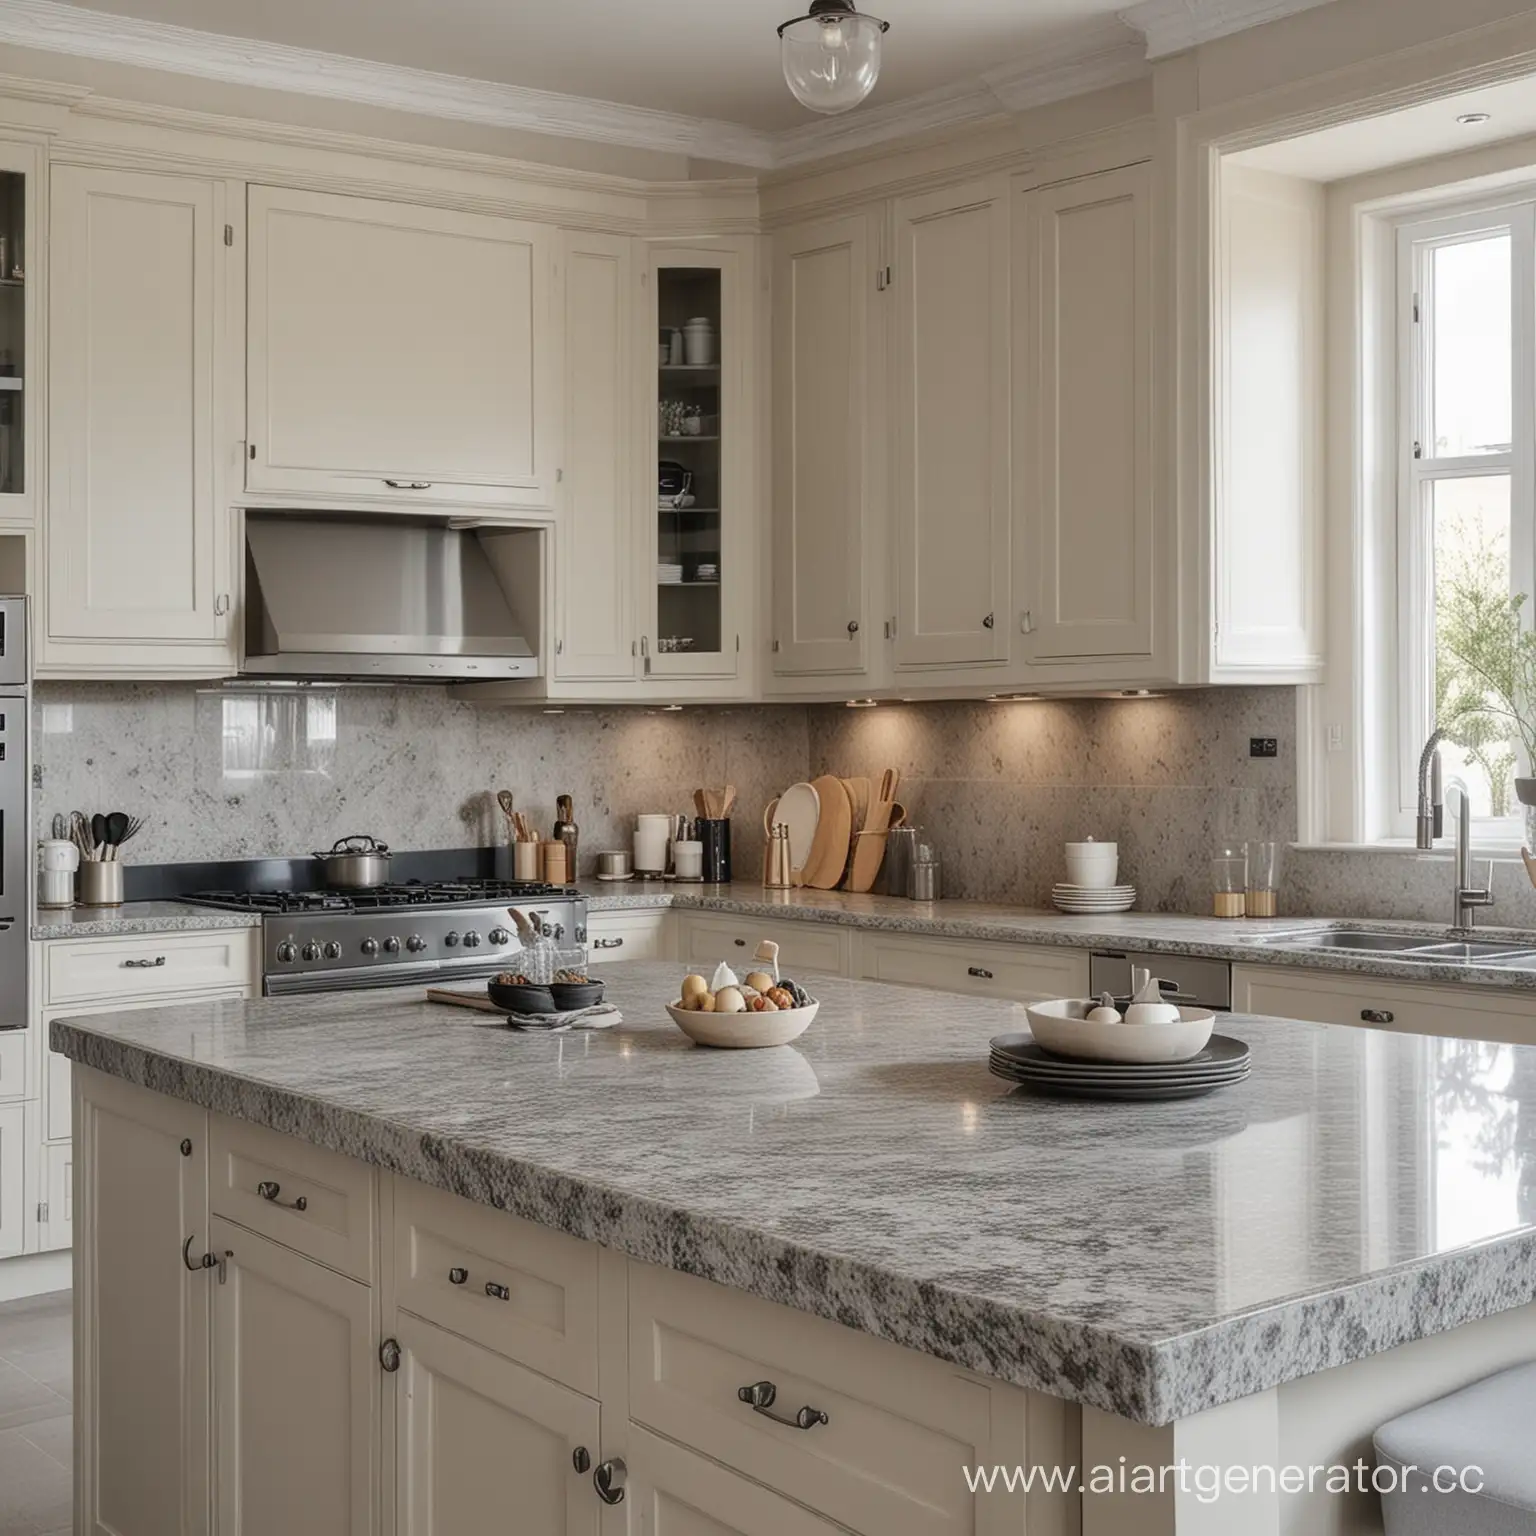 LightToned-Kitchen-with-Diverse-Tableware-on-Granite-Countertop